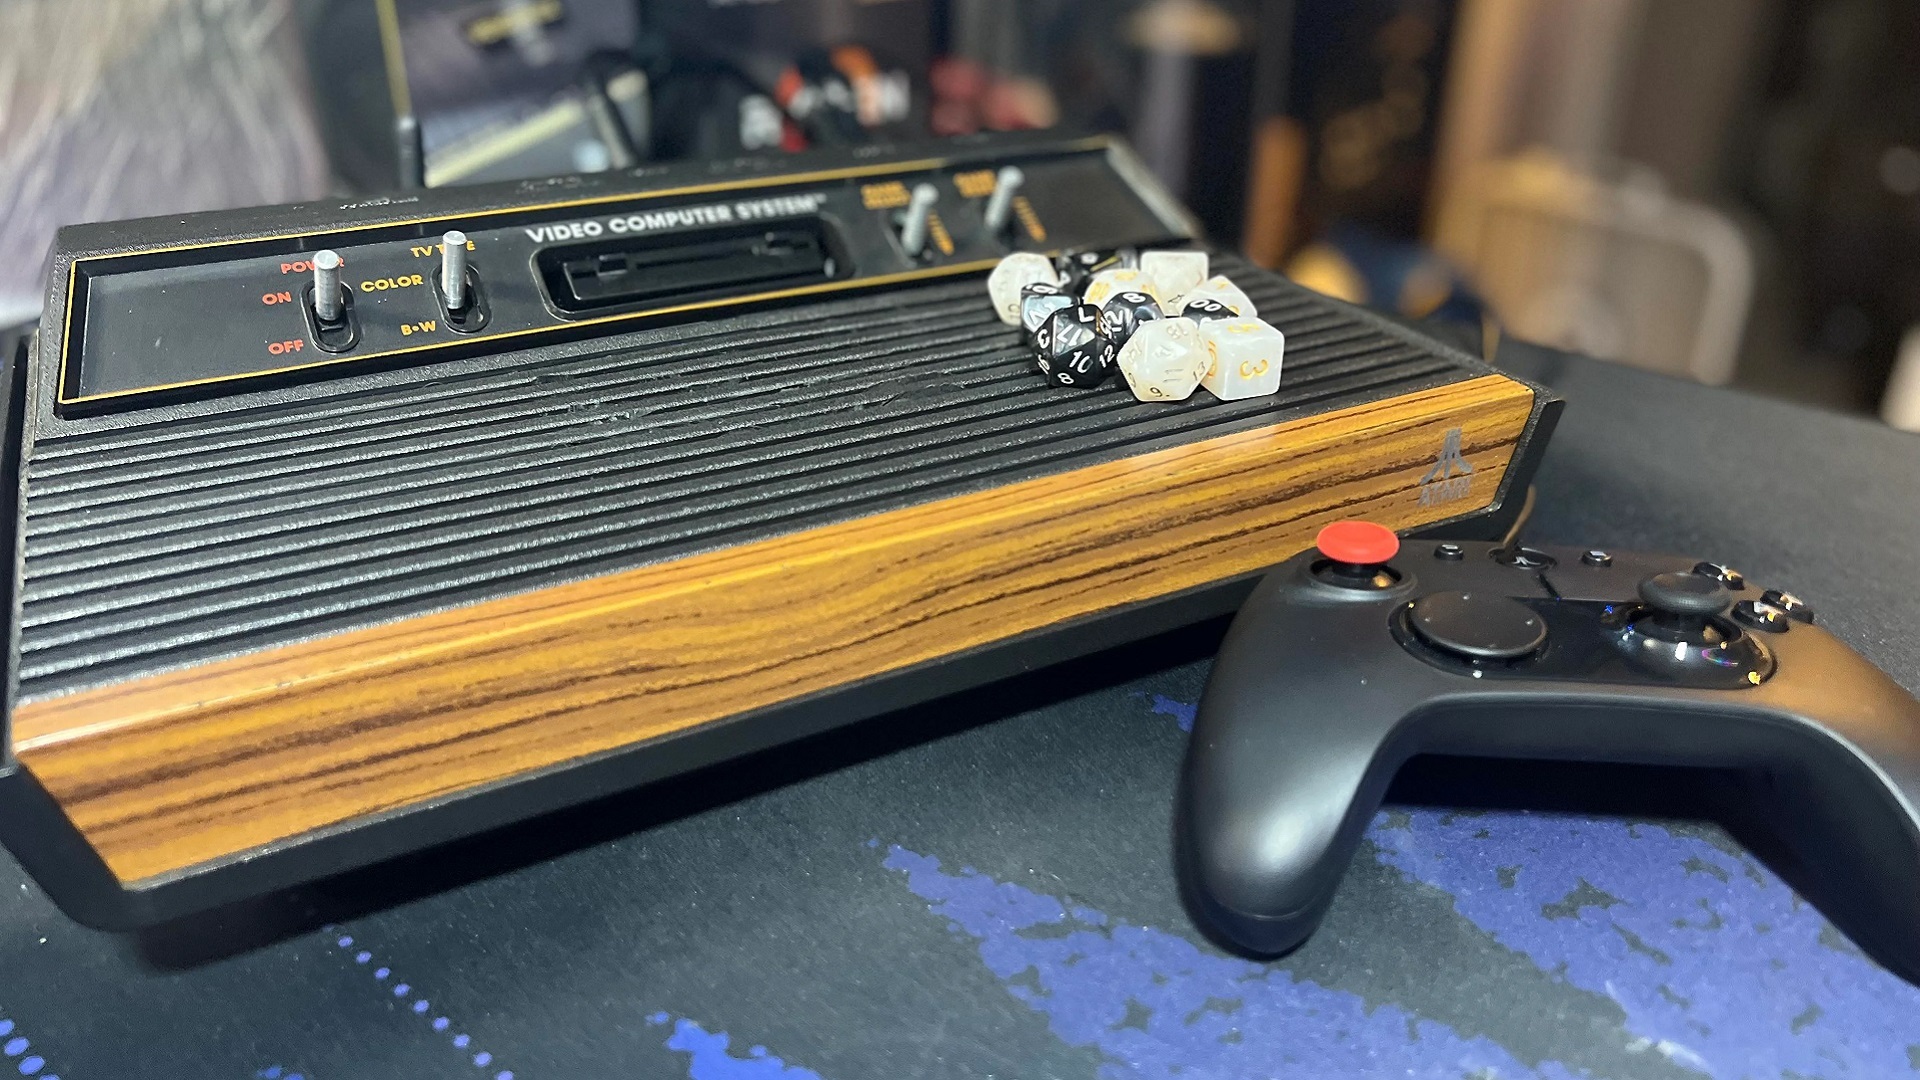 This Atari 2600 gaming PC can run The Witcher 3 and GTA 5